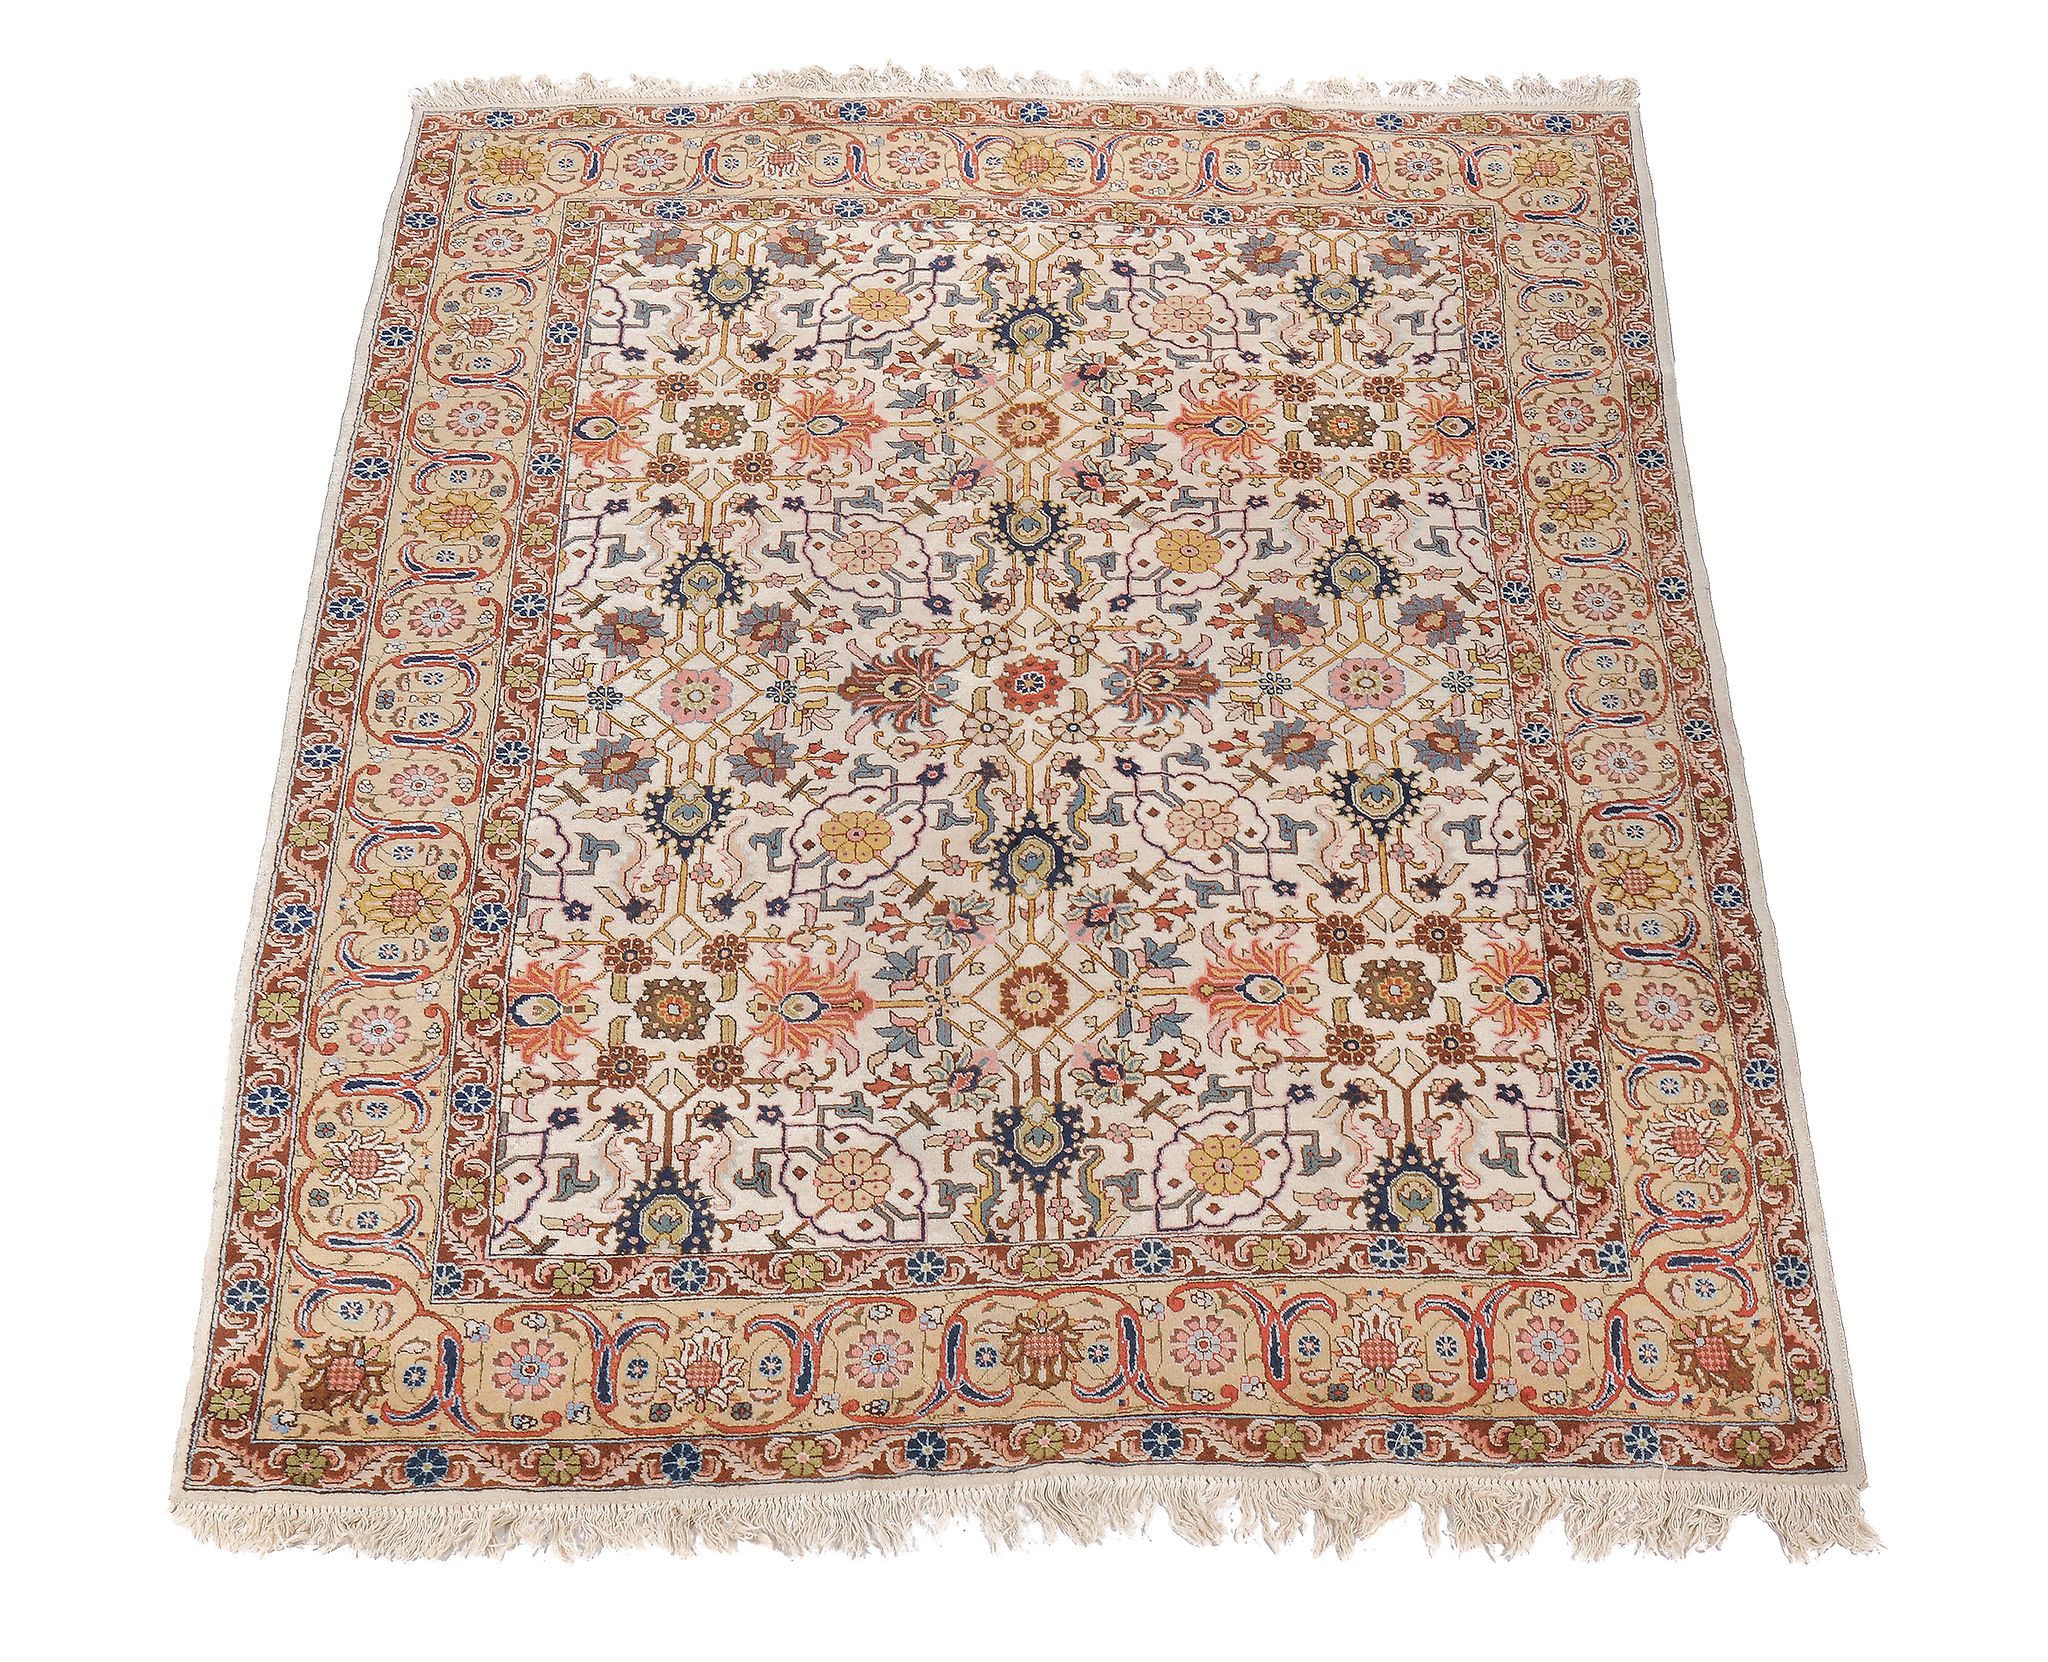 A Tabriz carpet, the cream field profusely decorated with flowerheads and foliage in polychrome,